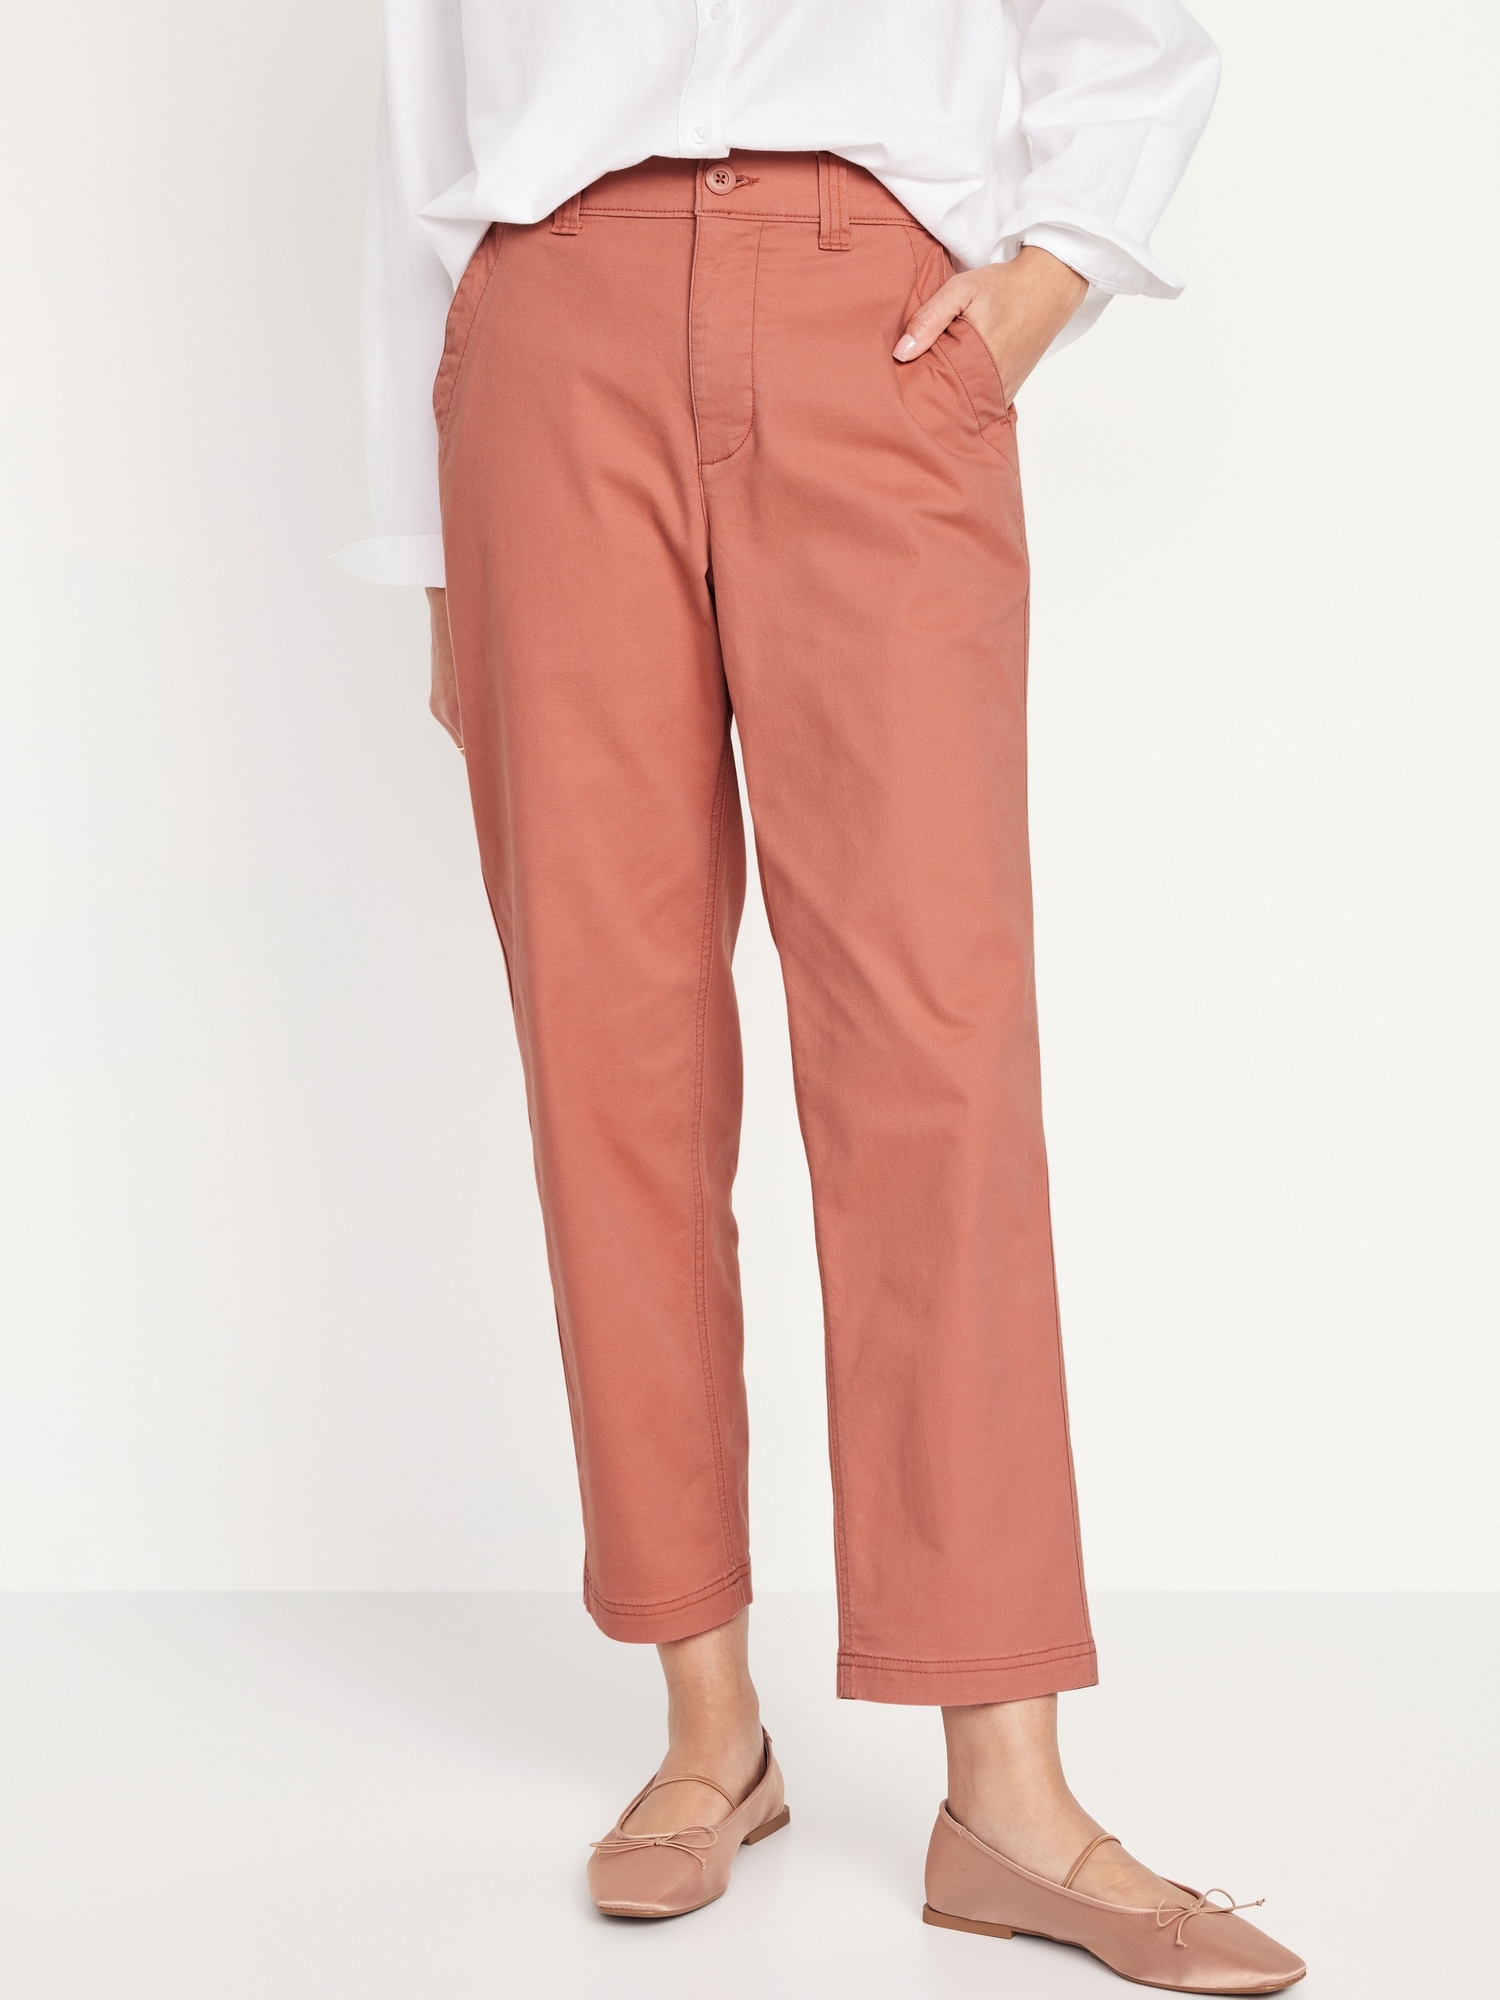 High-Waisted O.G. Straight Chino Pants for Women